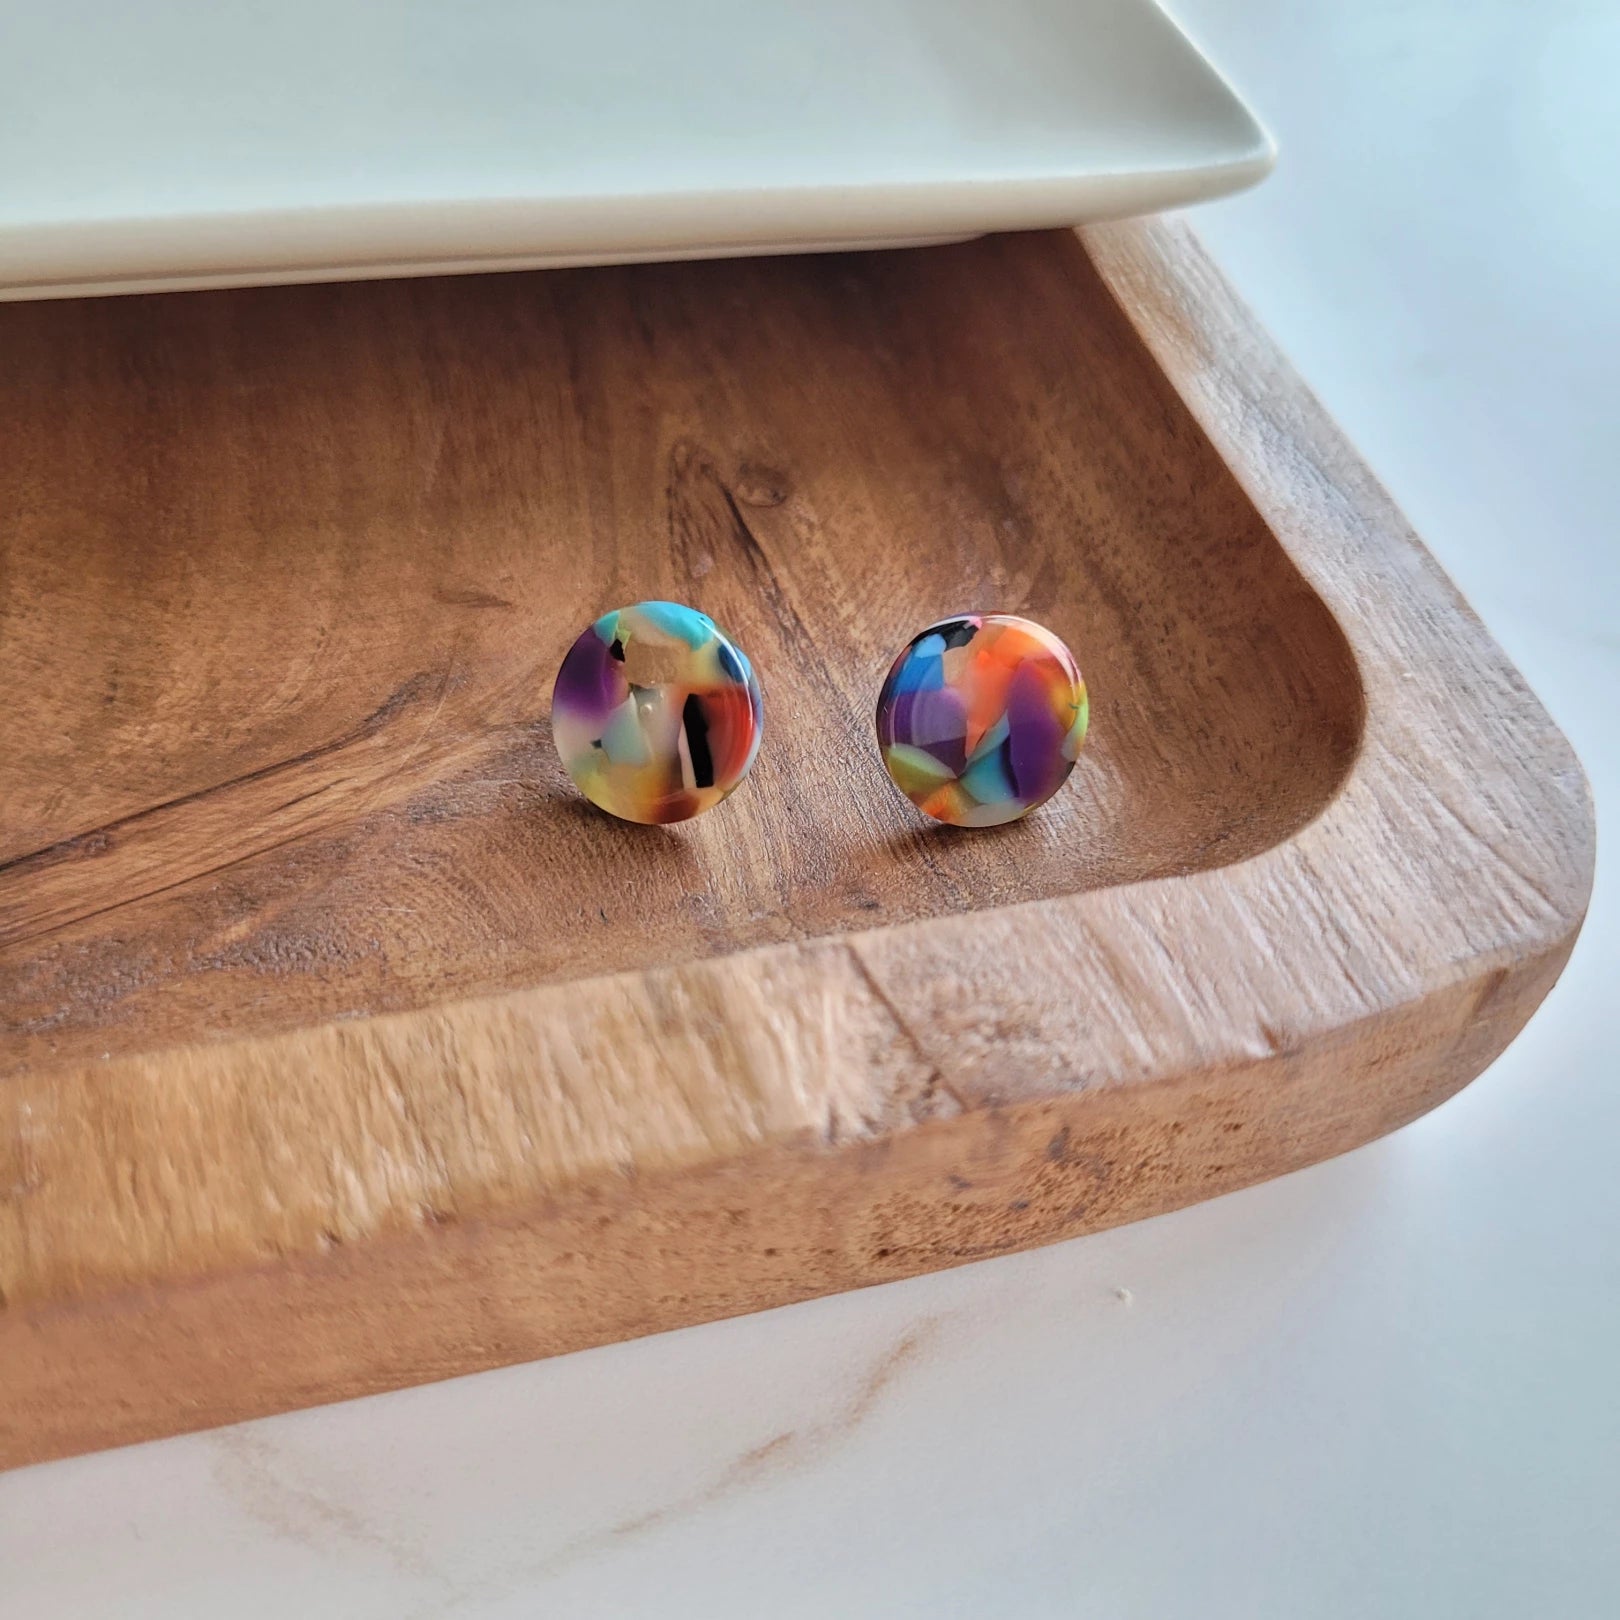 Our classic Sophie Stud Earrings are circle-shaped studs that come in a variety of colors. These earrings are perfect for everyday wear, and the simple design makes them versatile enough to pair with any outfit.  These studs are made with high-quality materials, ensuring they will be a staple in your jewelry collection for years to come.